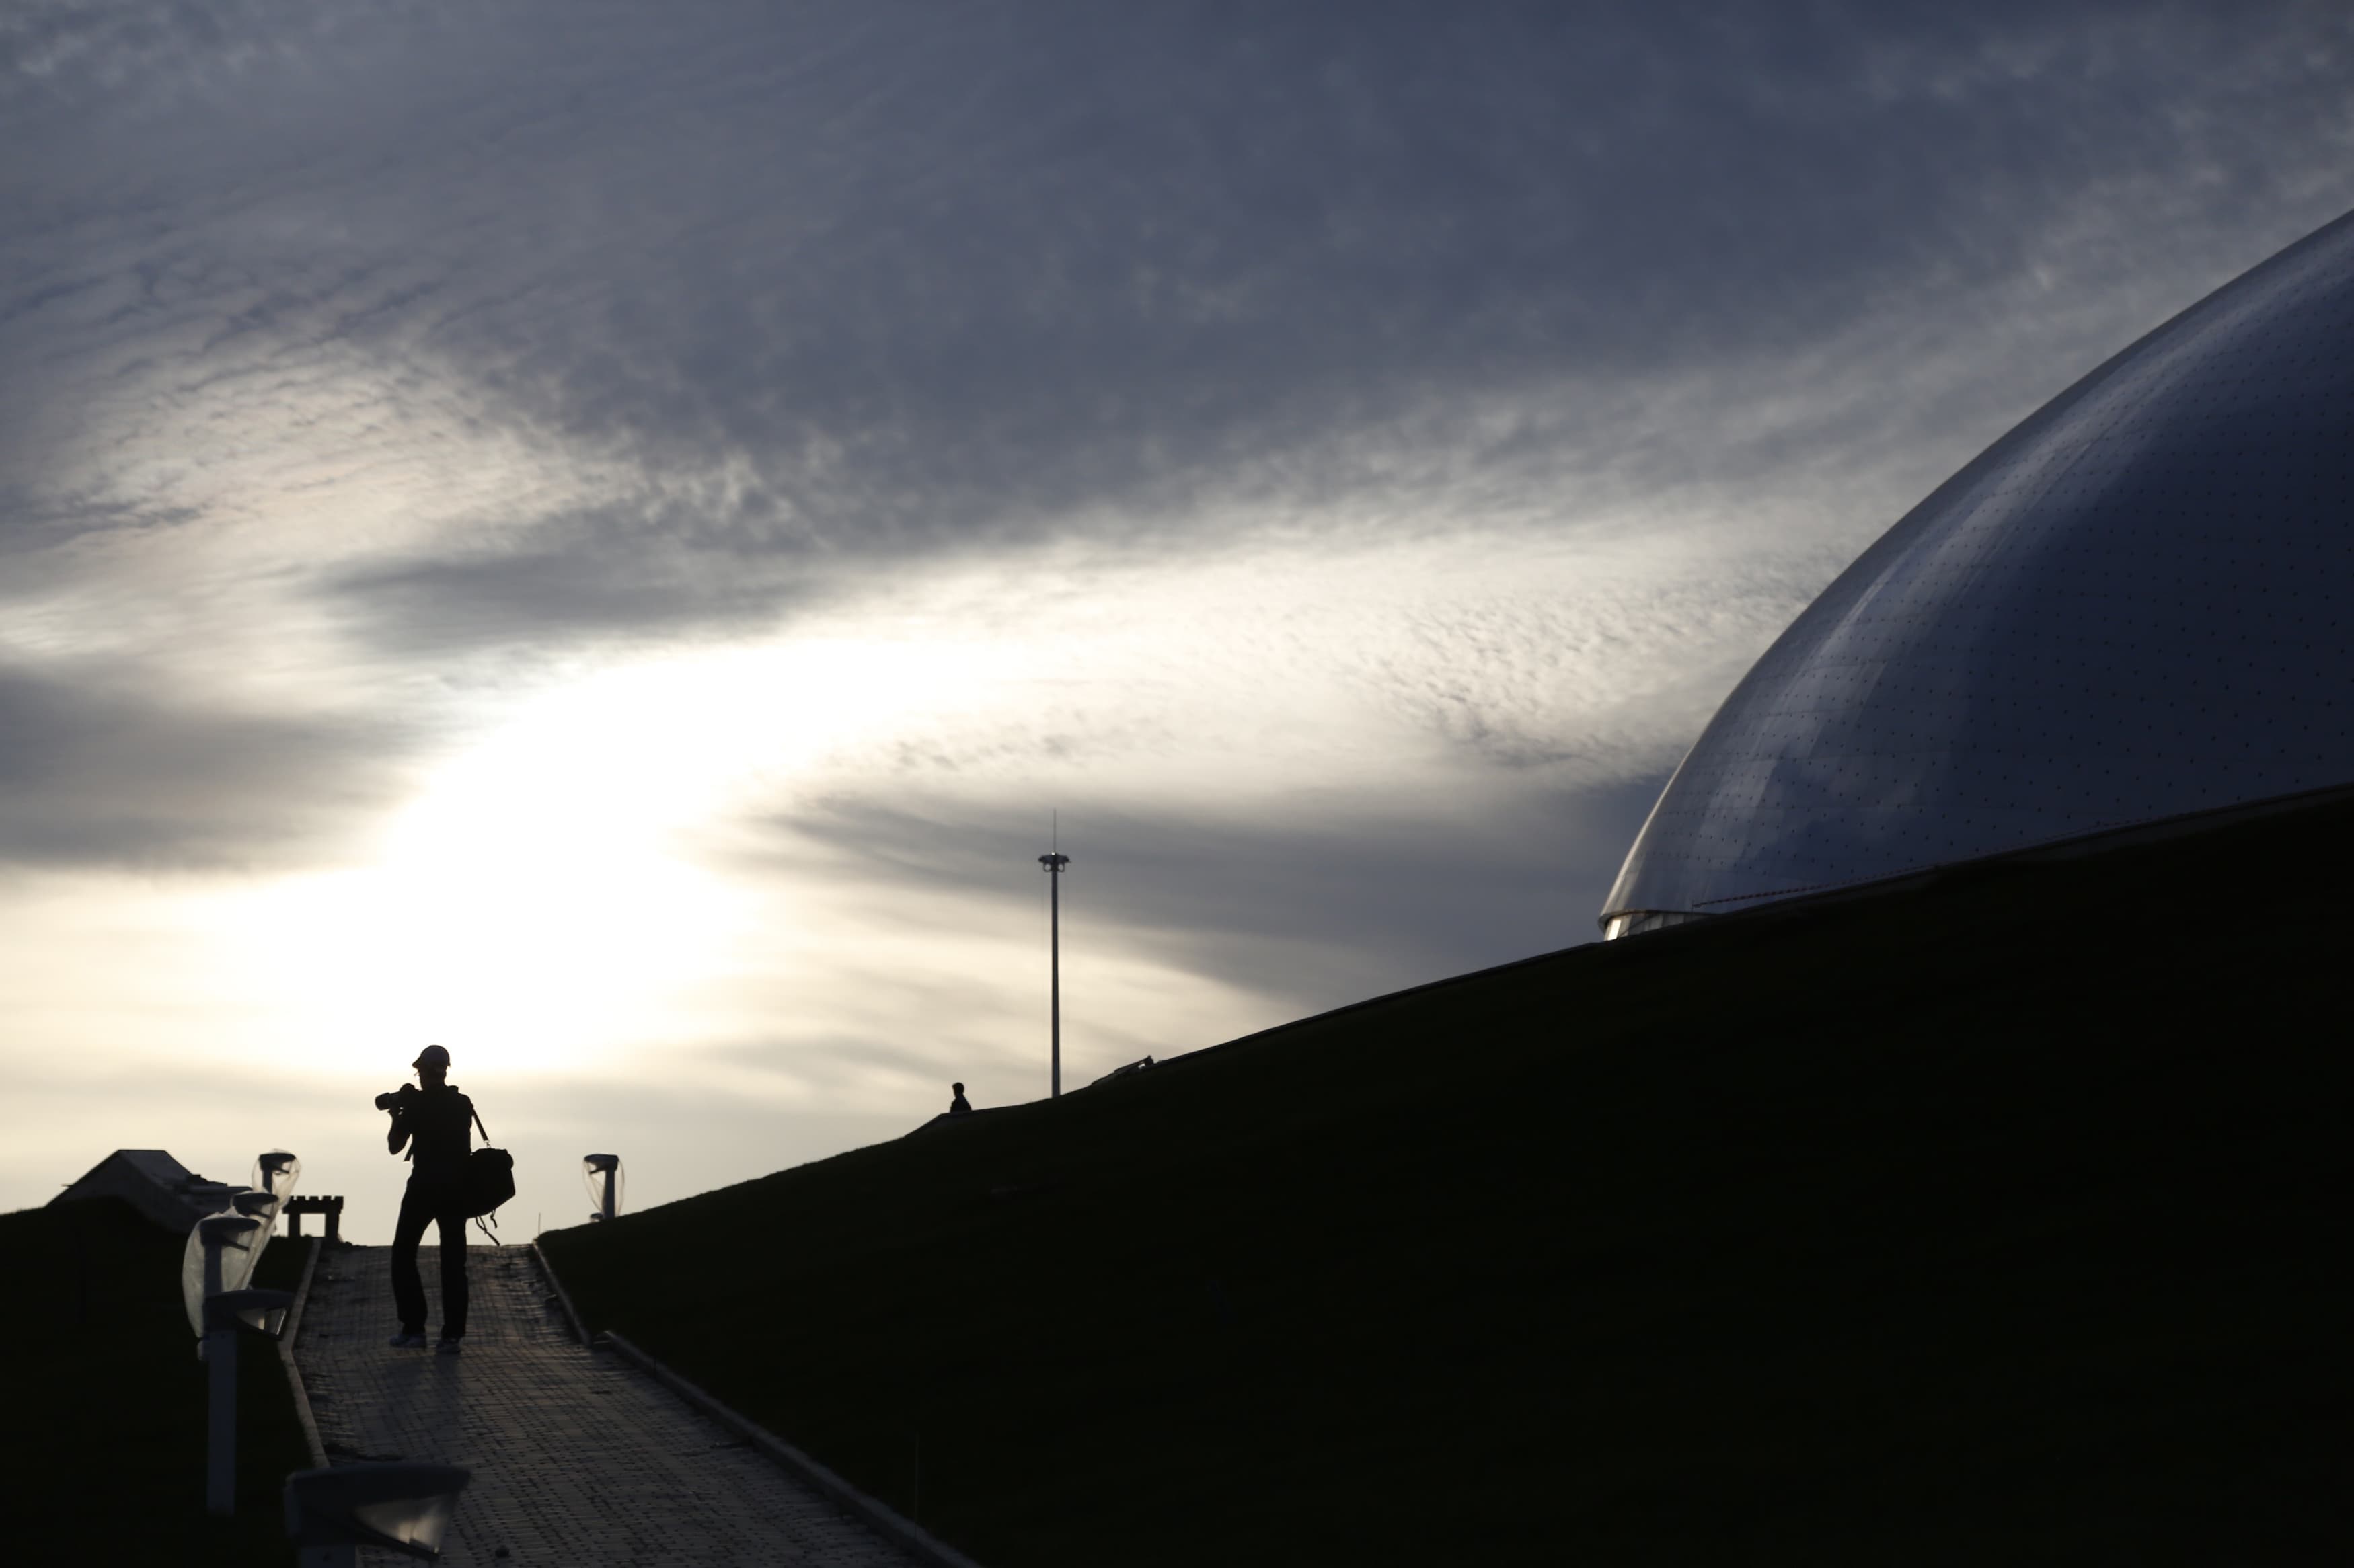 A photographer is seen near "Bolshoy" Ice Dome, part of the complex of facilities to be used for the Sochi 2014 Winter Olympics, 6 November 2012. , REUTERS/Pawel Kopczynski